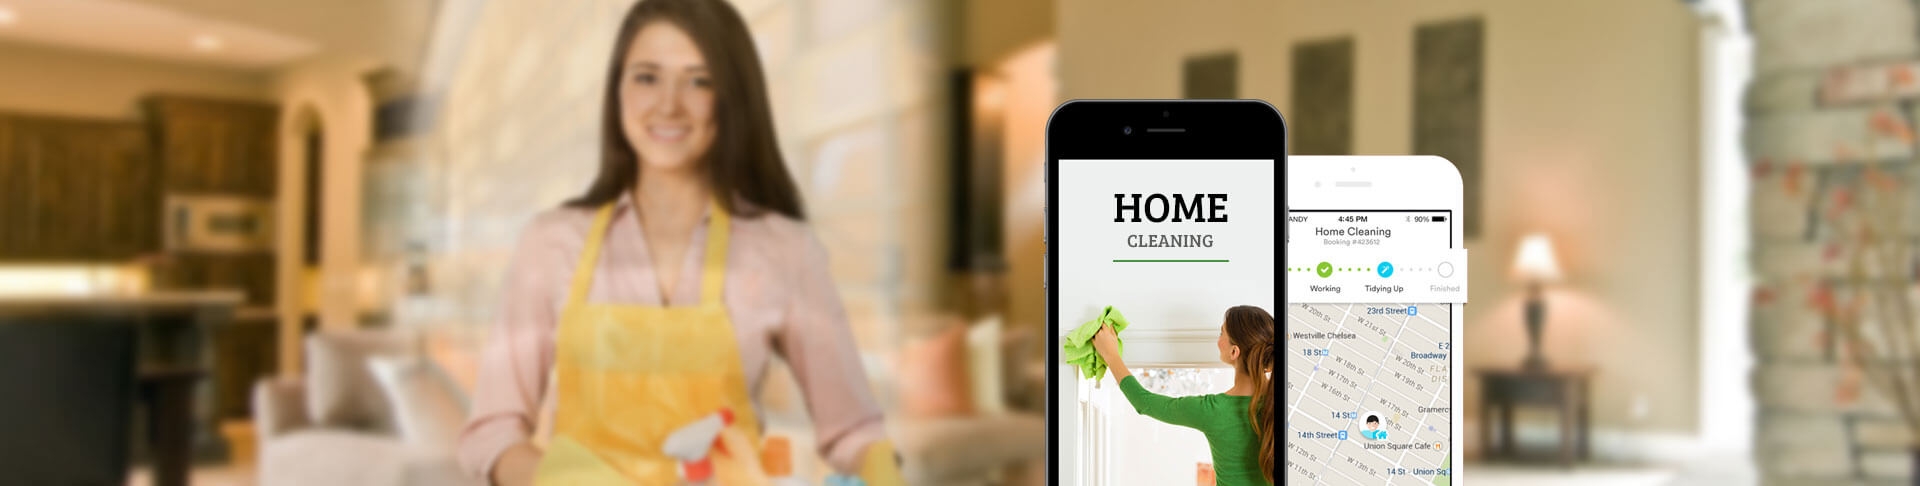 Home Cleaning App